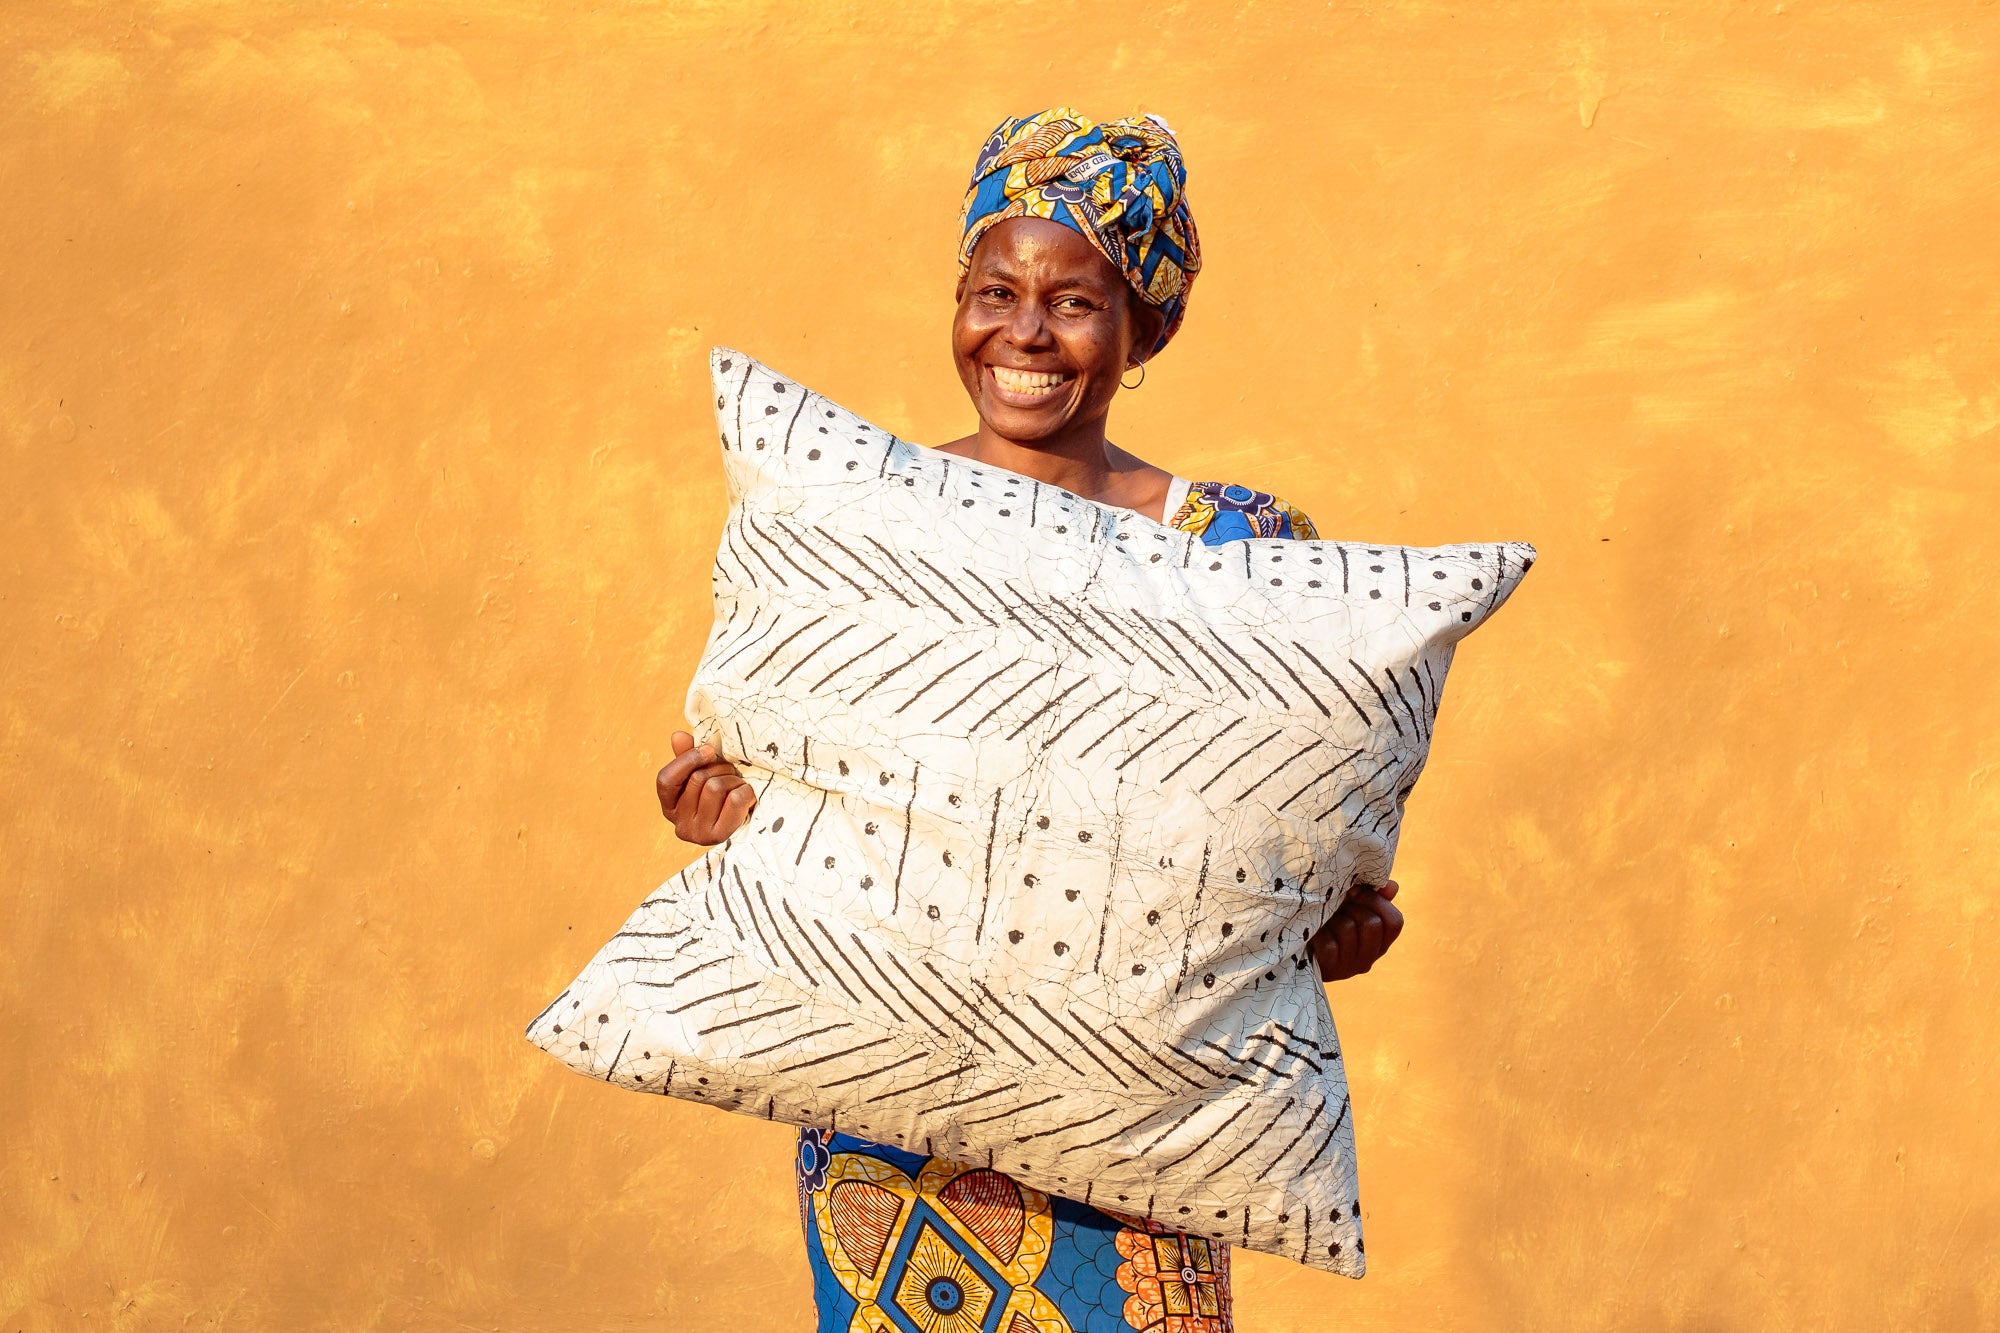 Handcrafted Home Decor from Rural Zambia - TRIBAL TEXTILES